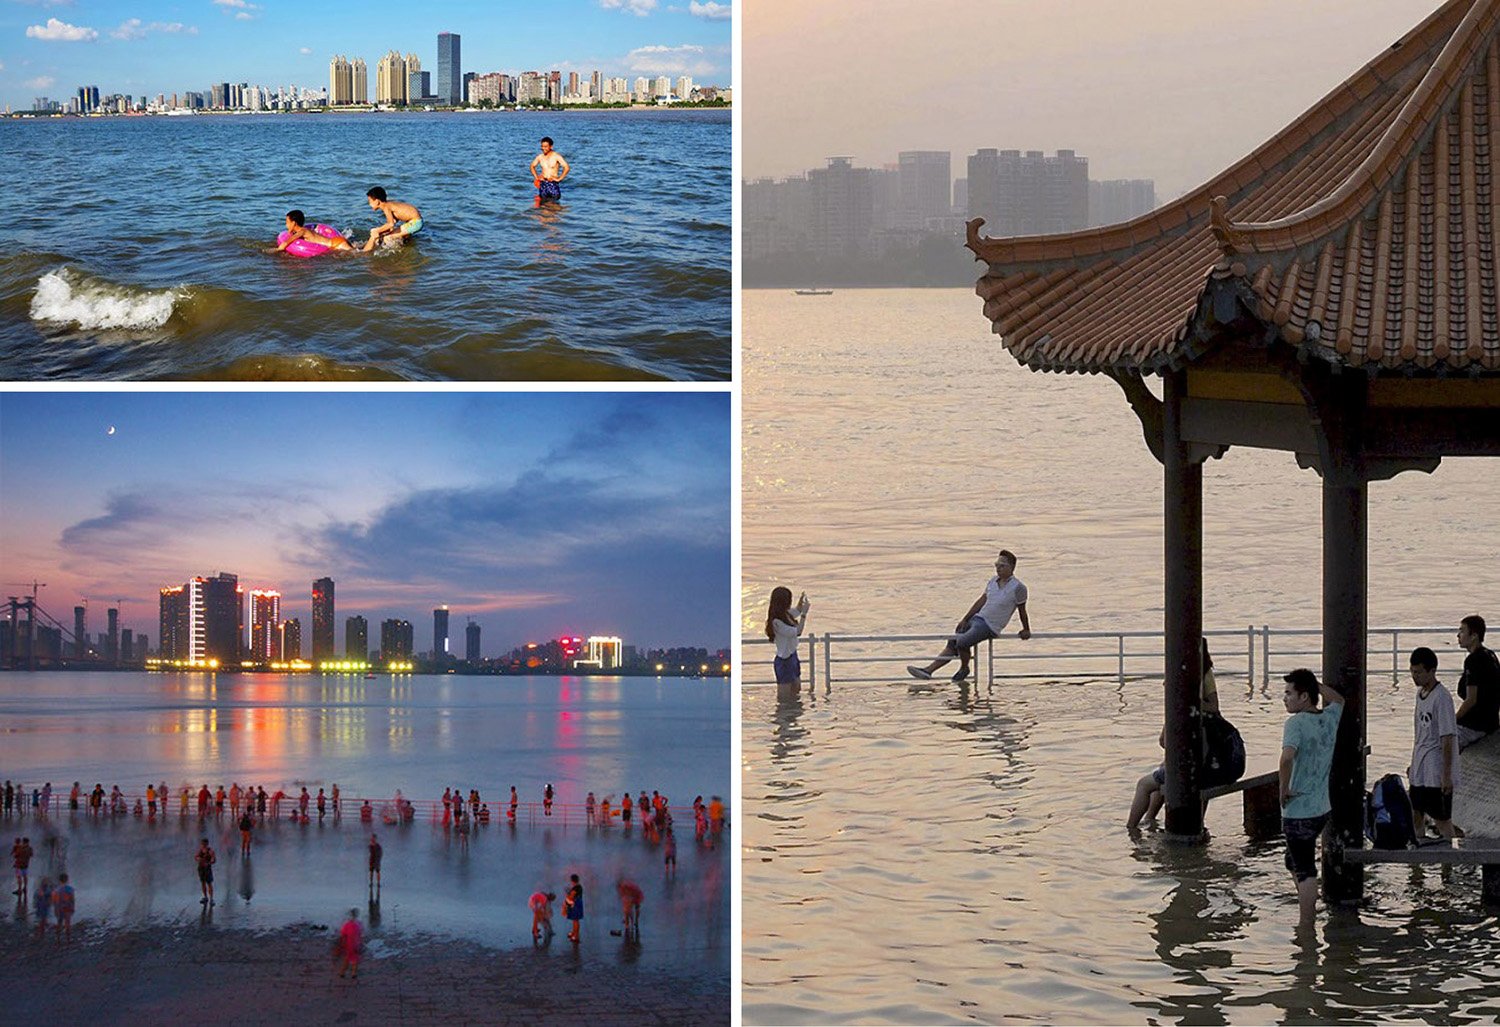 LIFE GOES ON: Living with the Yangtze is so deeply embedded in Wuhan’s culture that people still frequent the riverfront even when flooded, enjoying intimate contact with the water. | SASAKI